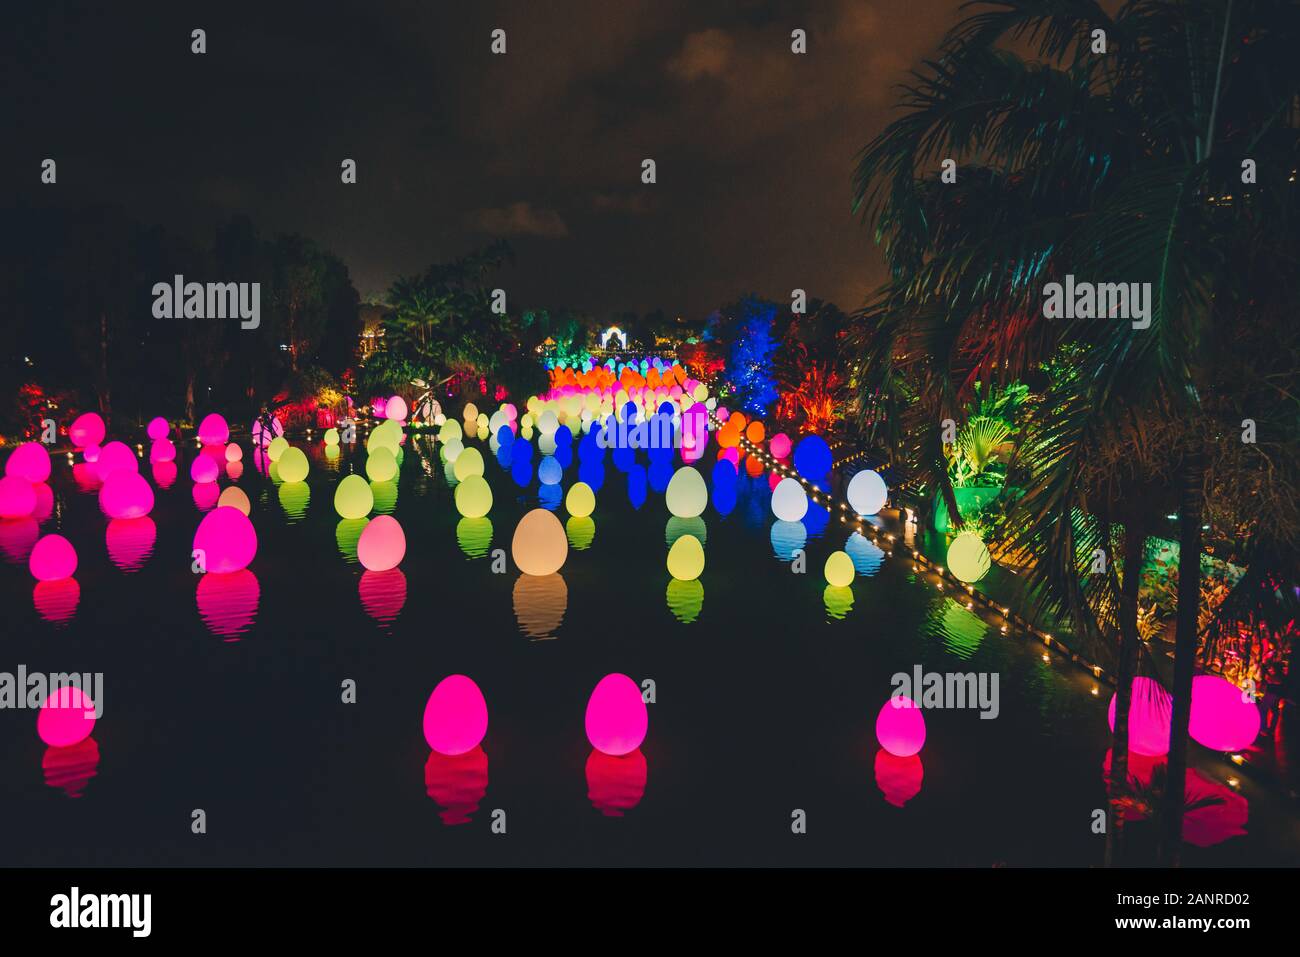 The gardens by the bay light exhibition in Marina bay, Singapore Stock Photo